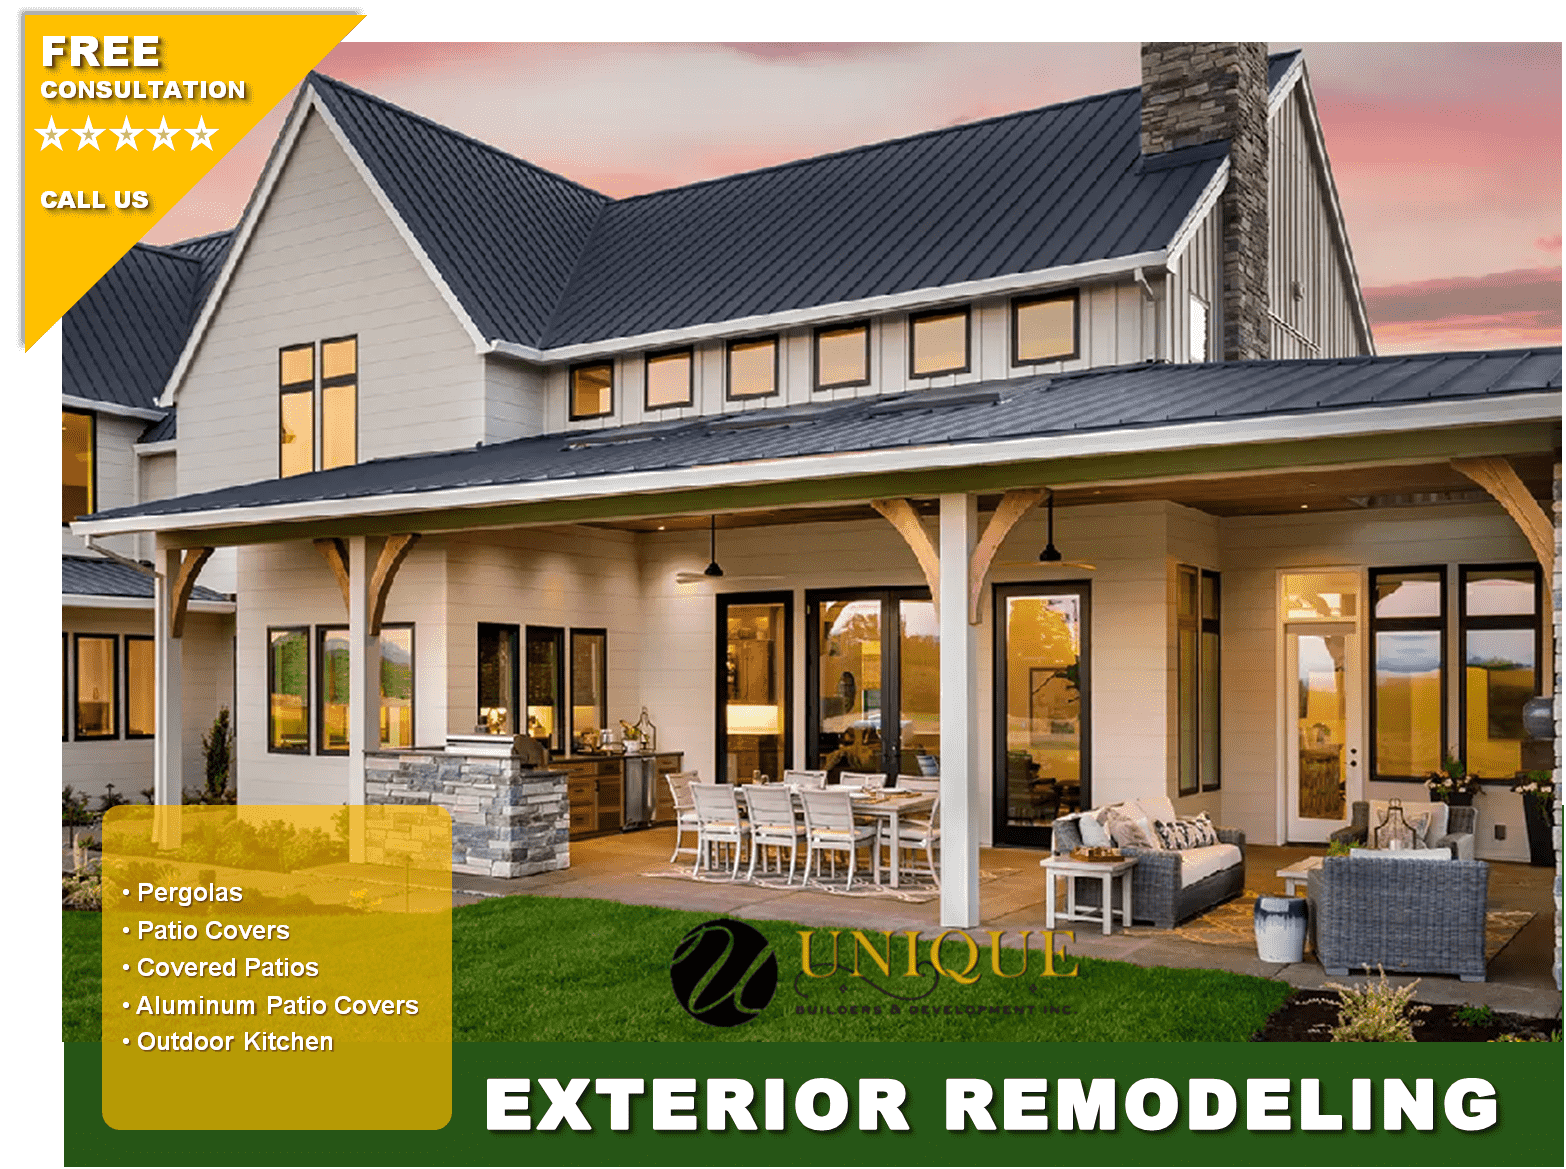 Houston Home Remodeling Exterior - Pergolas - Patio Covers - Covered Patios - Outdoor Kitchen